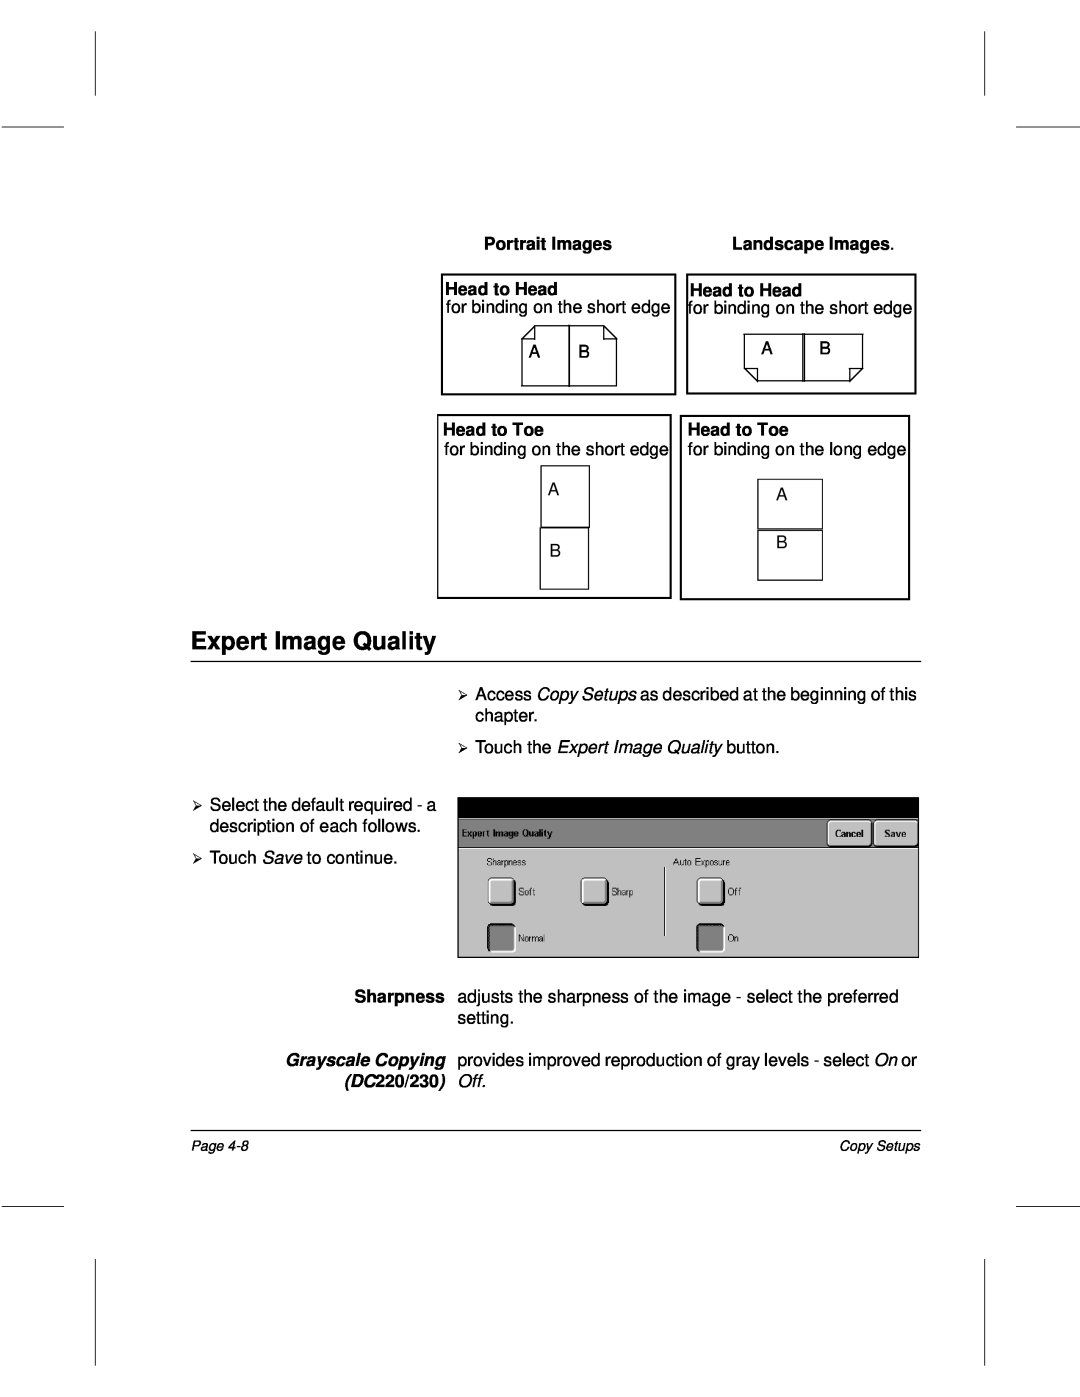 Xerox 220, 340, 332, 230 setup guide Touch the Expert Image Quality button 